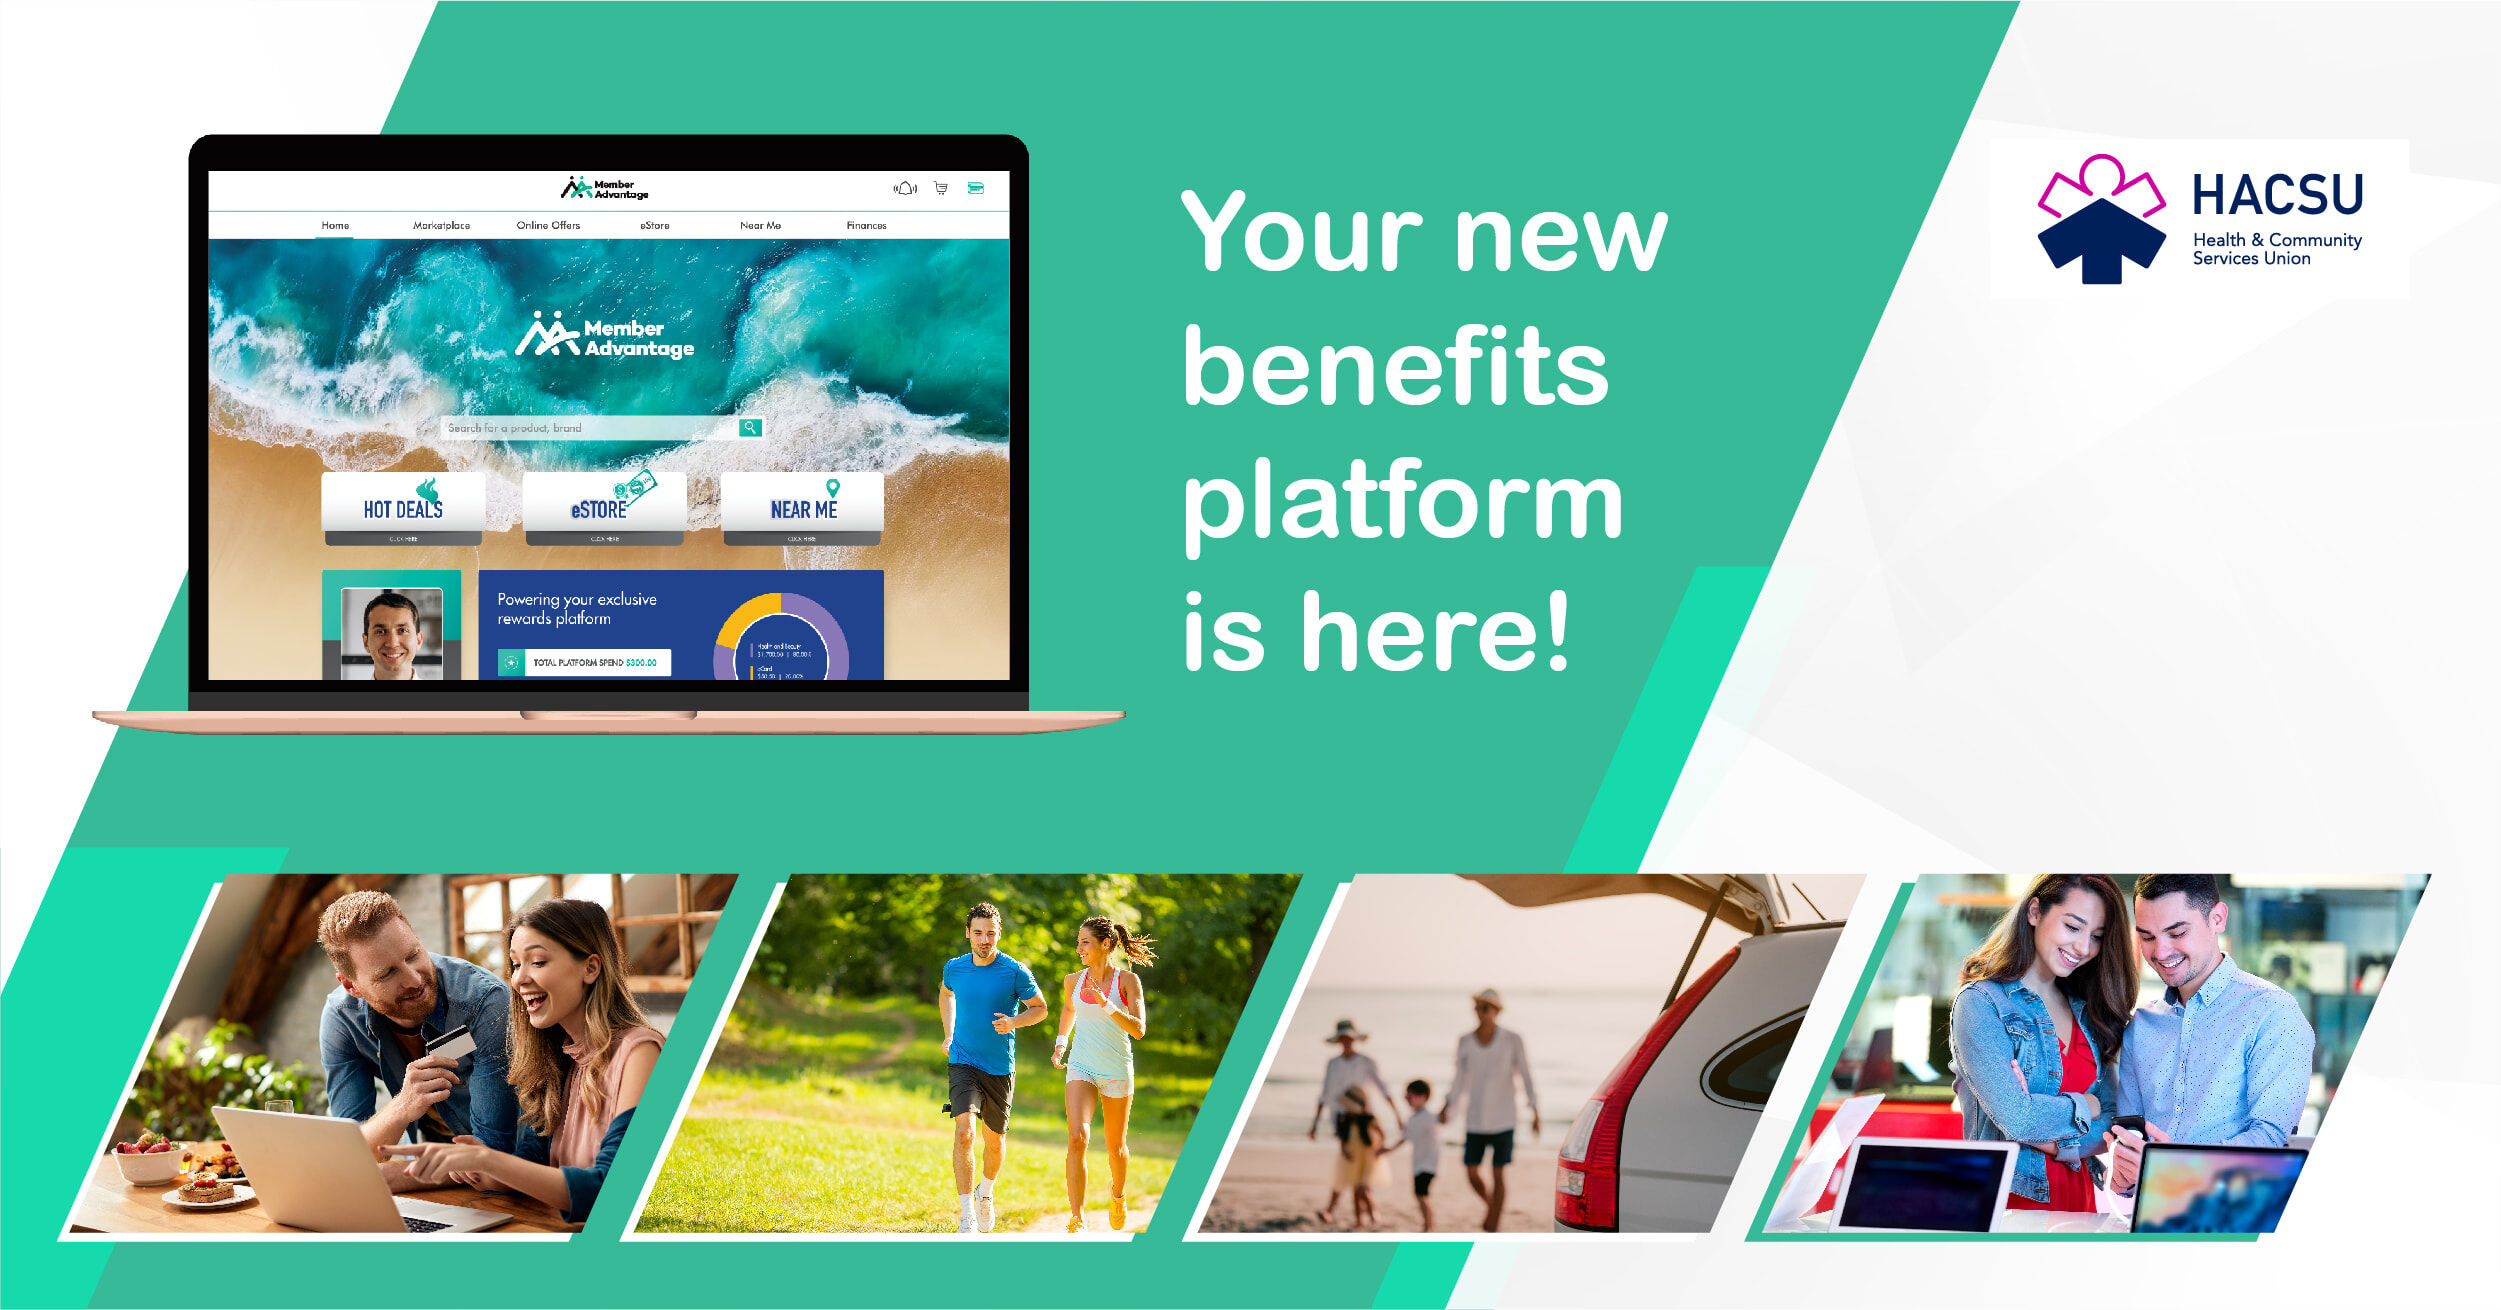 Your new benefits platform is here with Member Advantage and HACSU!